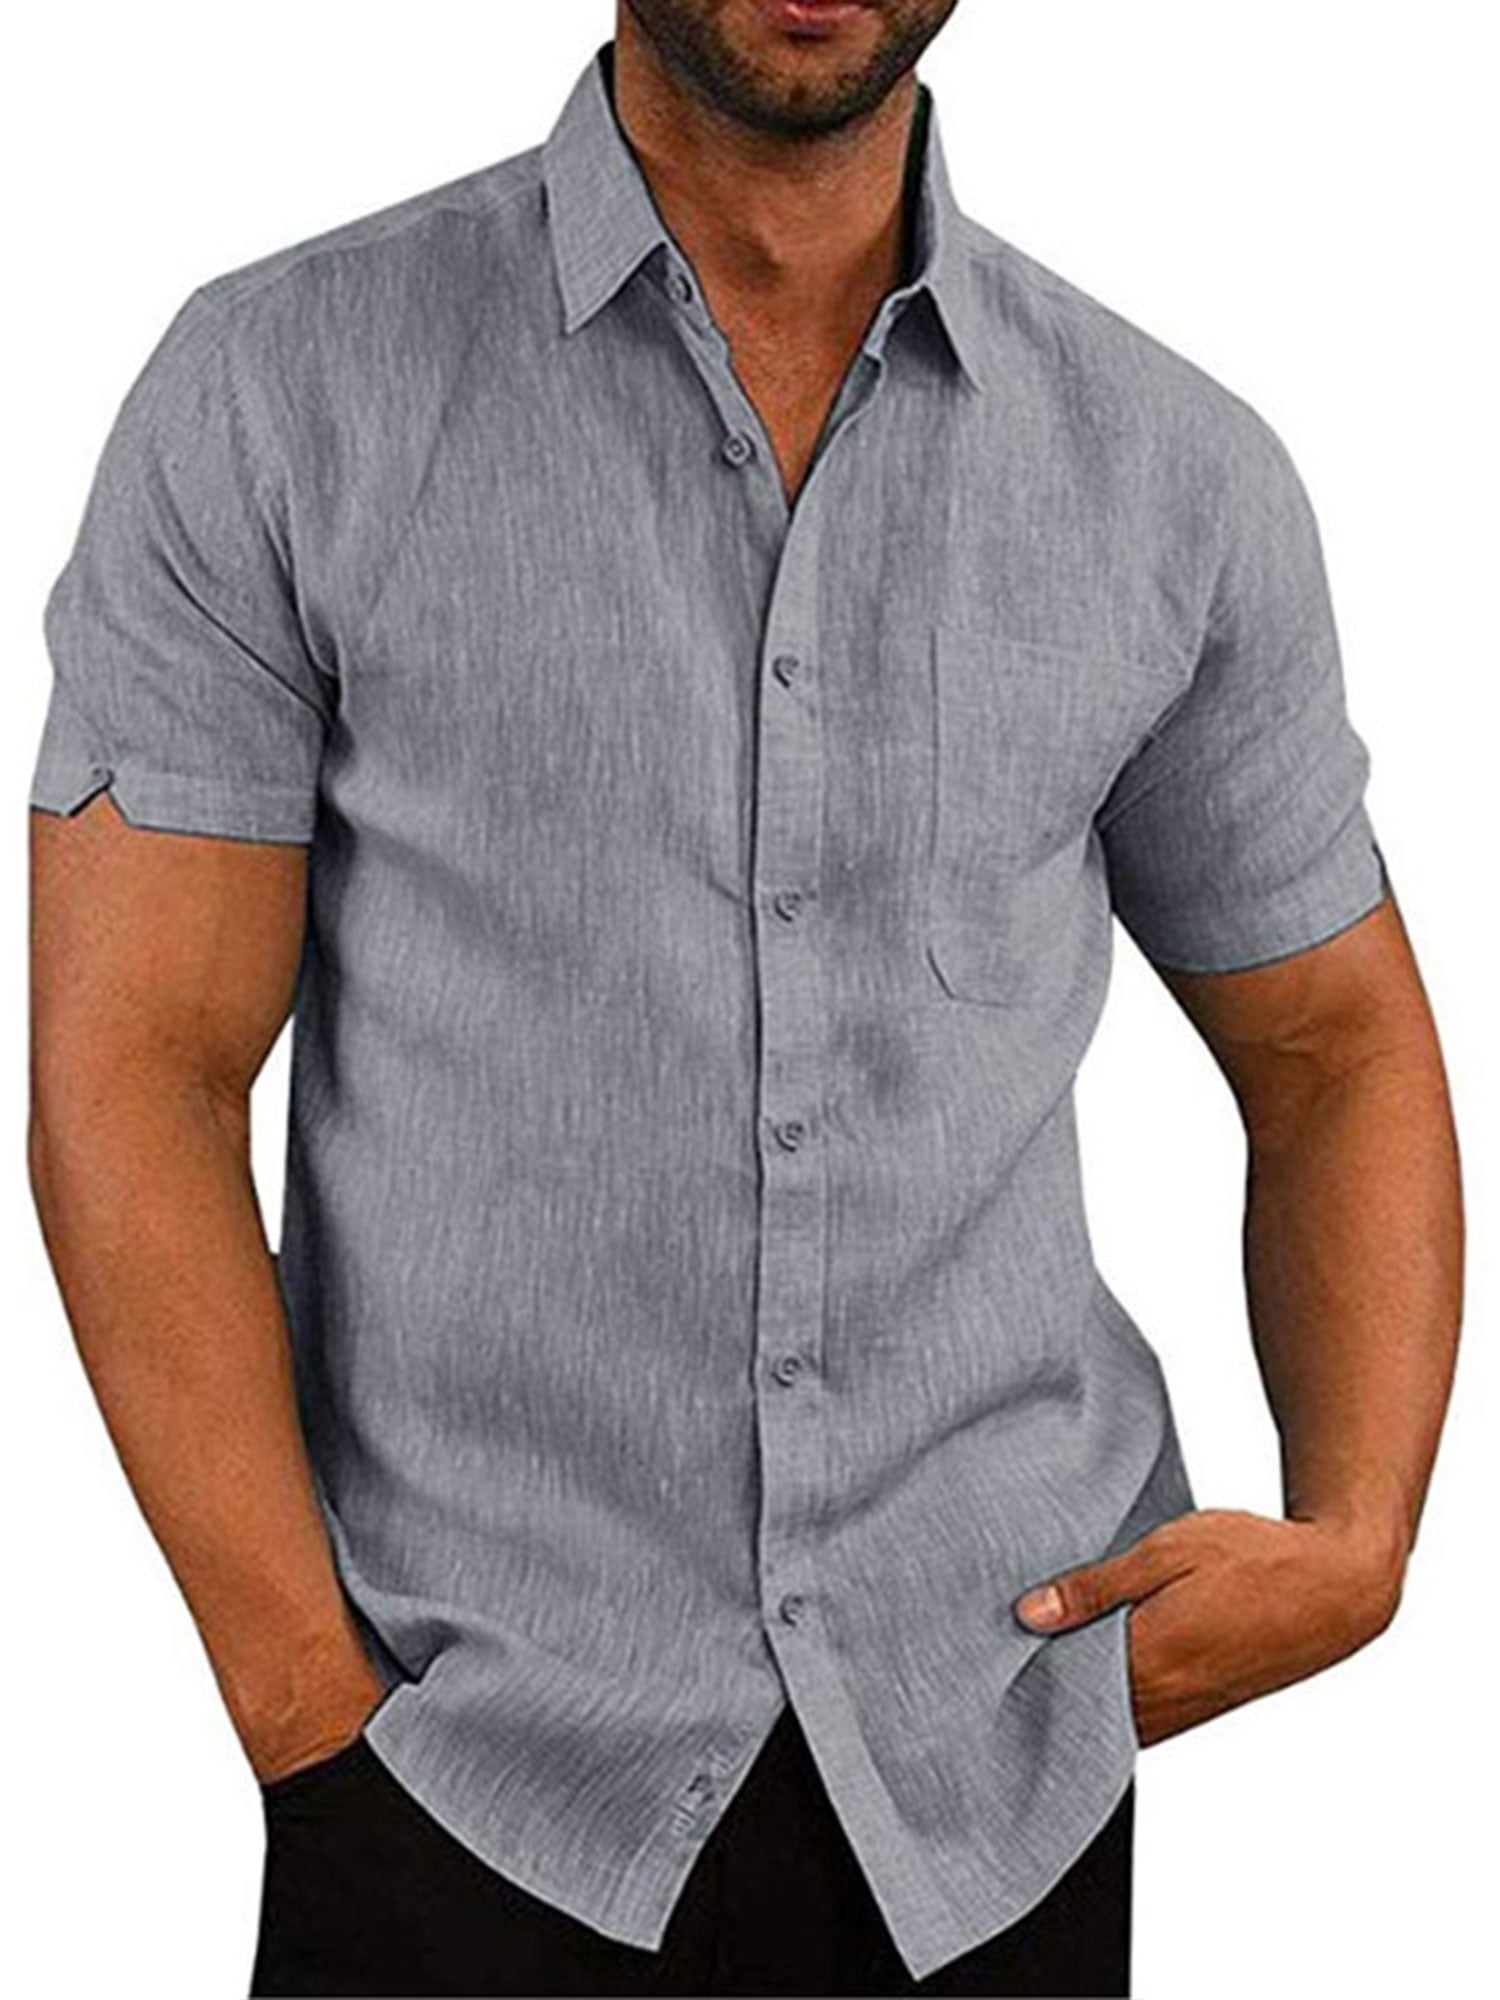 YYear Men Cotton Linen Short Sleeve Color Block Button Up Shirts with Pocket